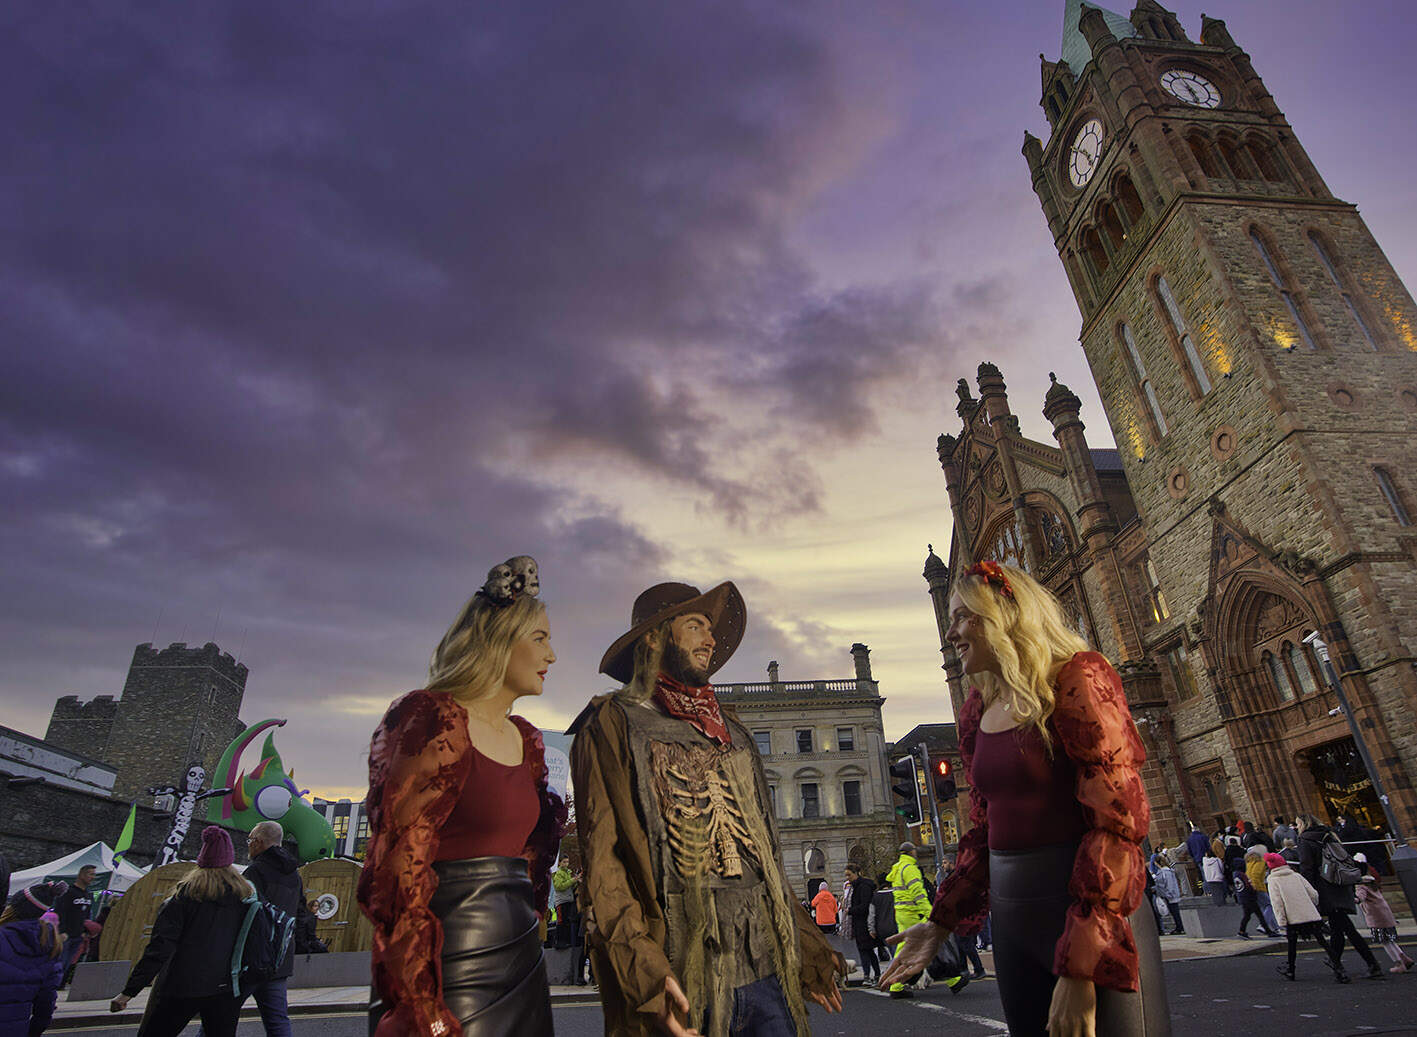 Derry revelers in costume outside the Guild Hall